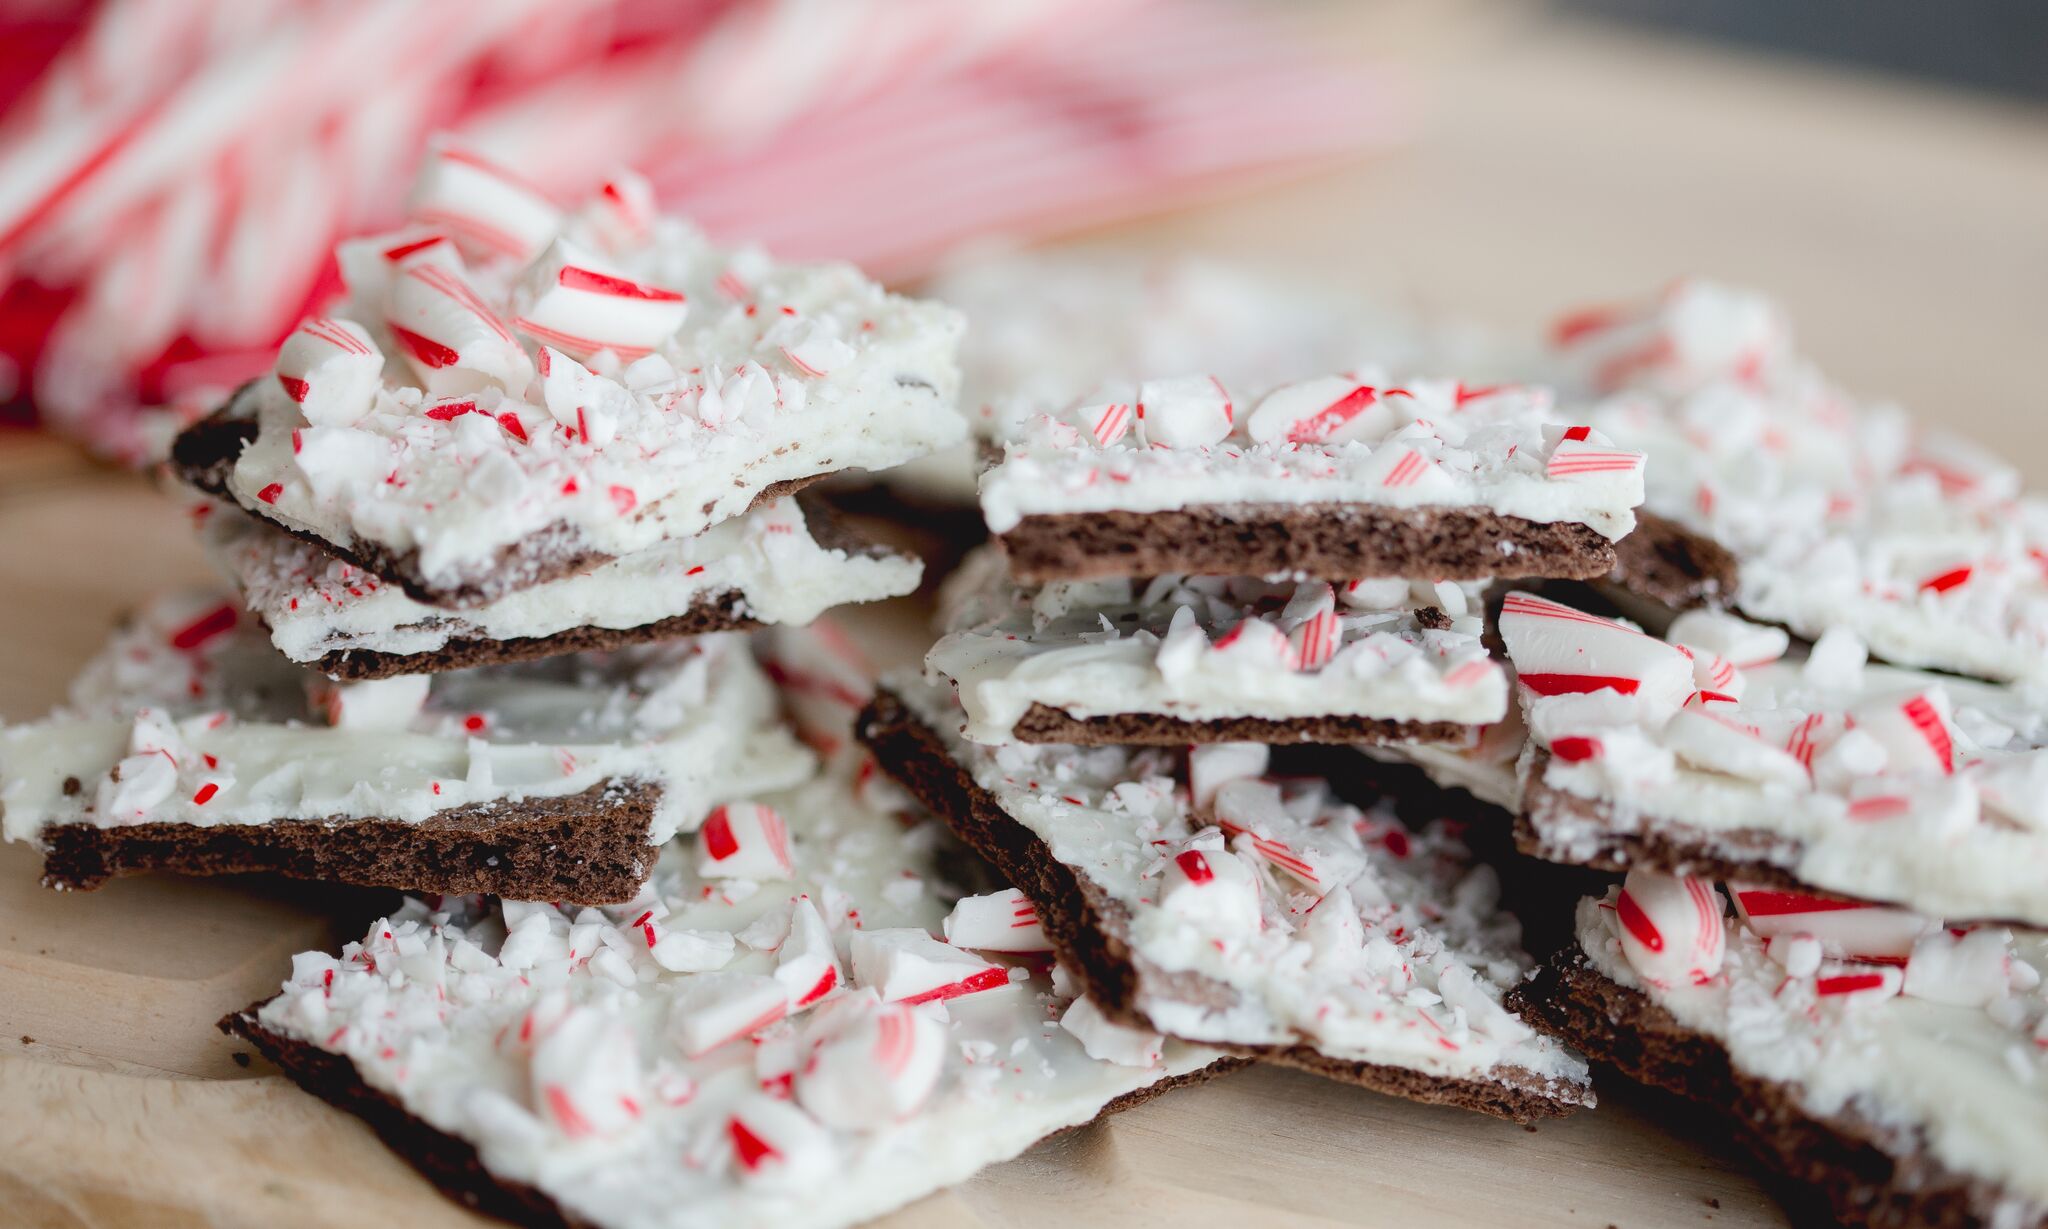 Looking for the perfect holiday recipe? This delicious semi-homemade peppermint bark comes together in as little as 20 minutes and uses just 3 ingredients!